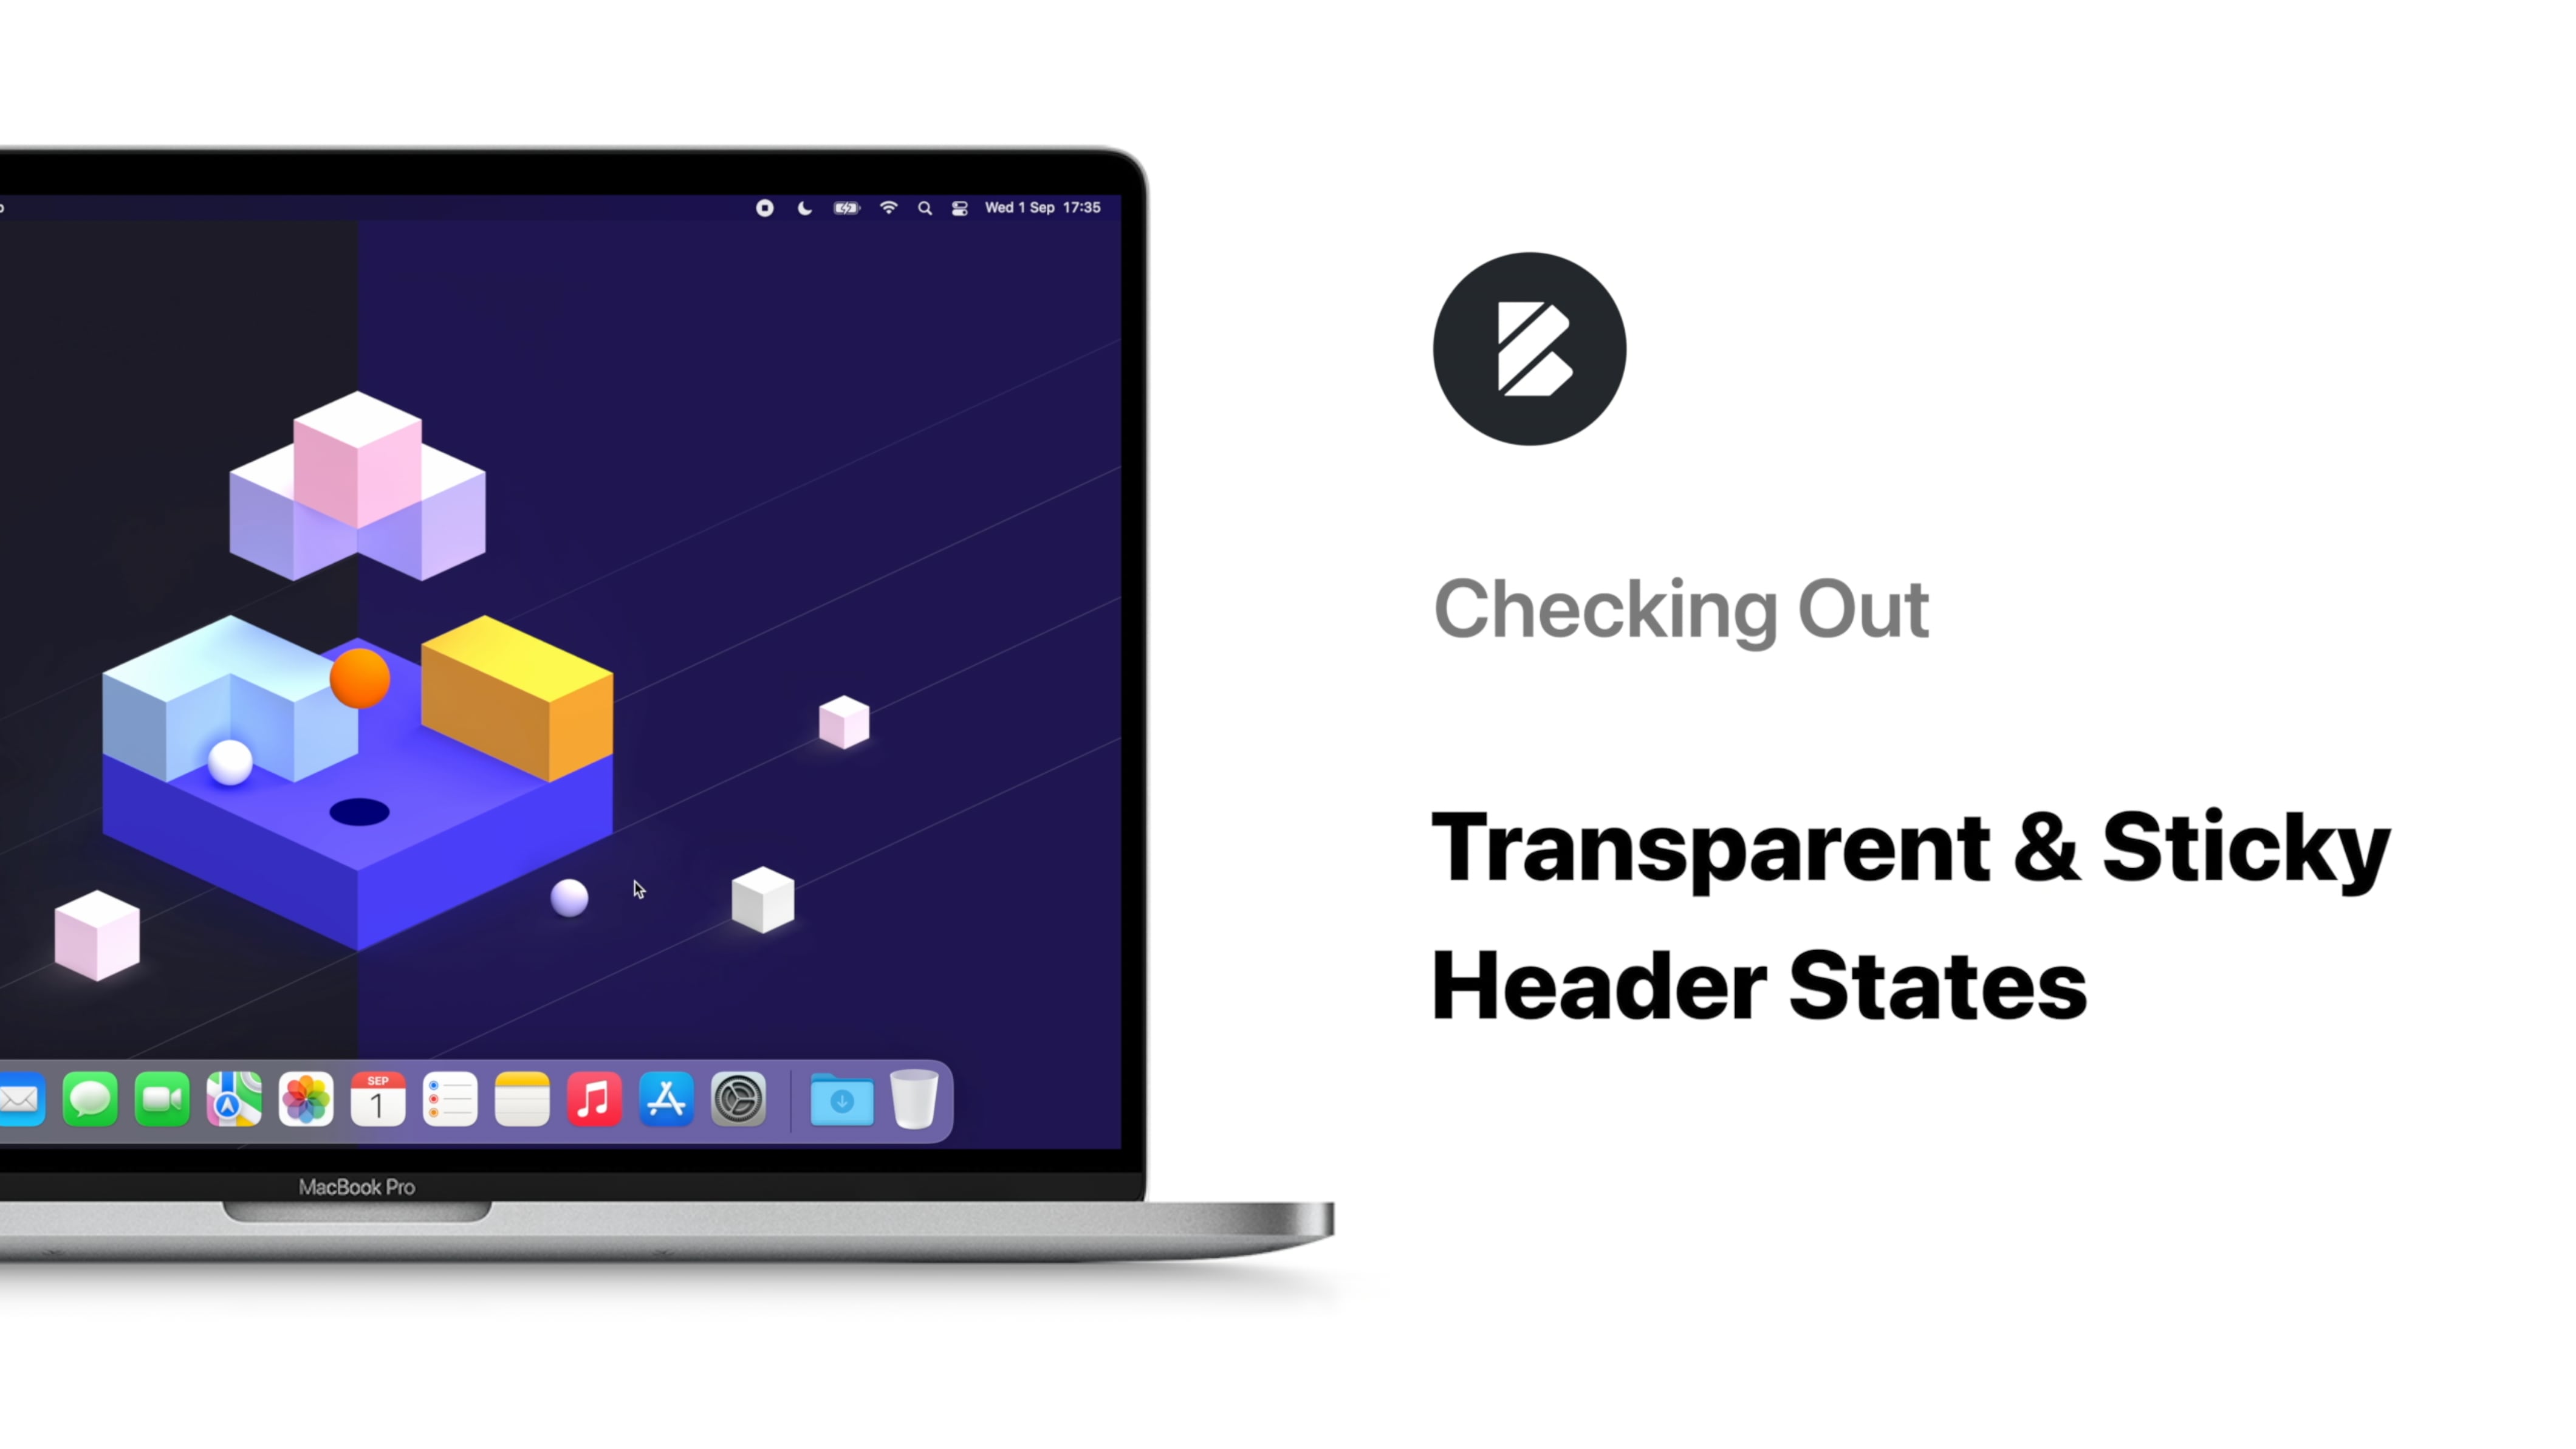 Checking Out the Header's Transparent & Sticky States - Blocksy